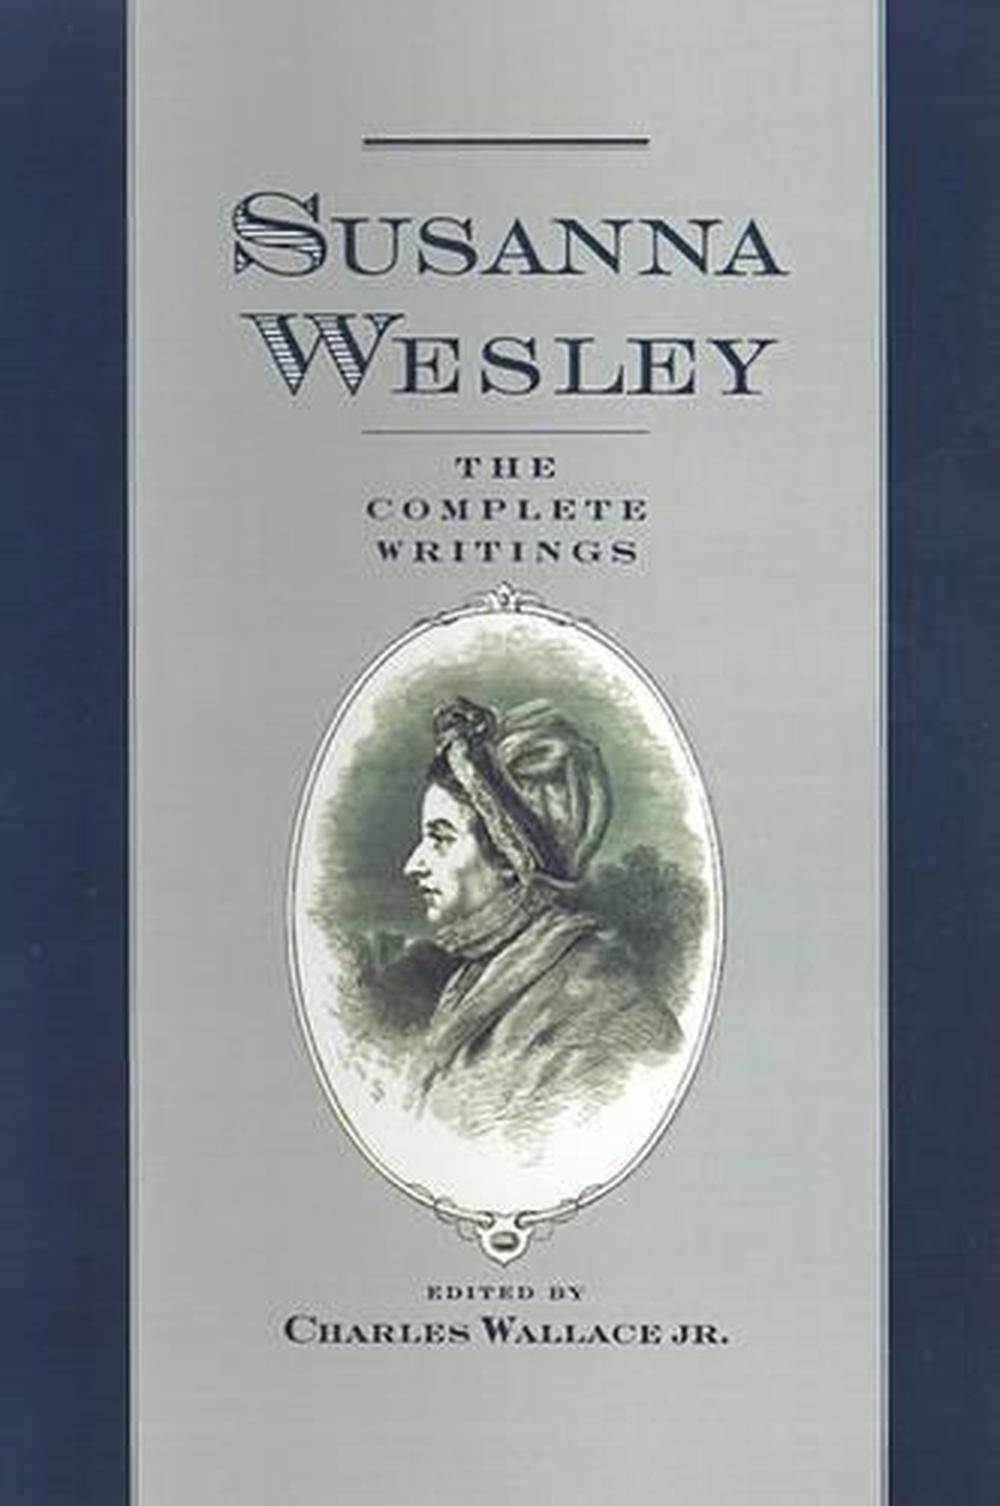 Susanna Wesley: The Complete Writings by Susanna Wesley (English